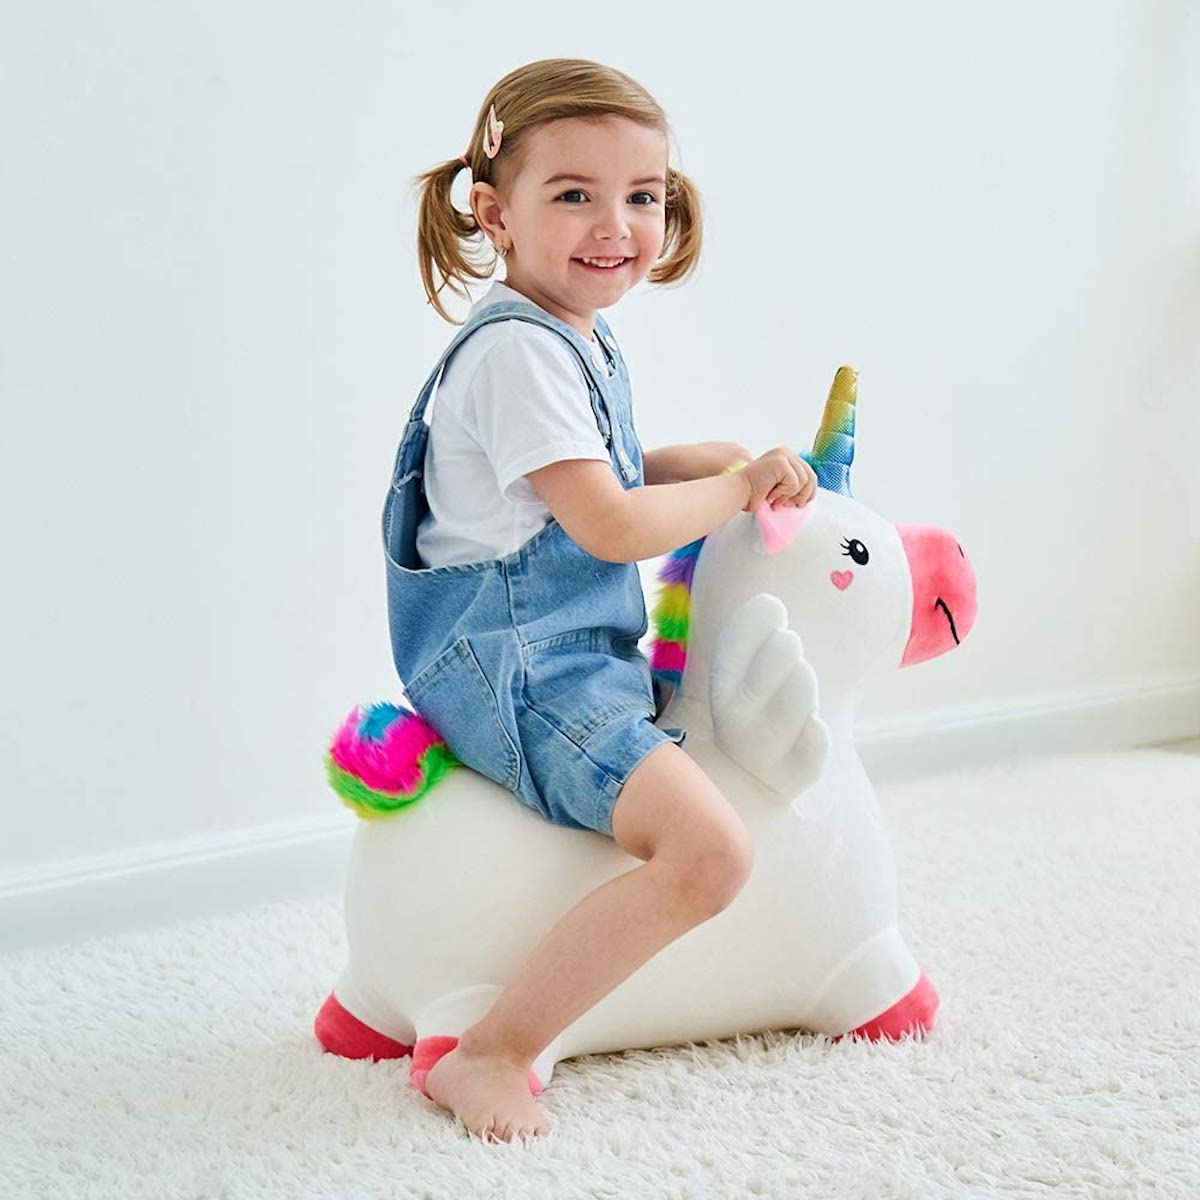 17 Cute Easter Basket Gifts For Toddlers & Their Mamas